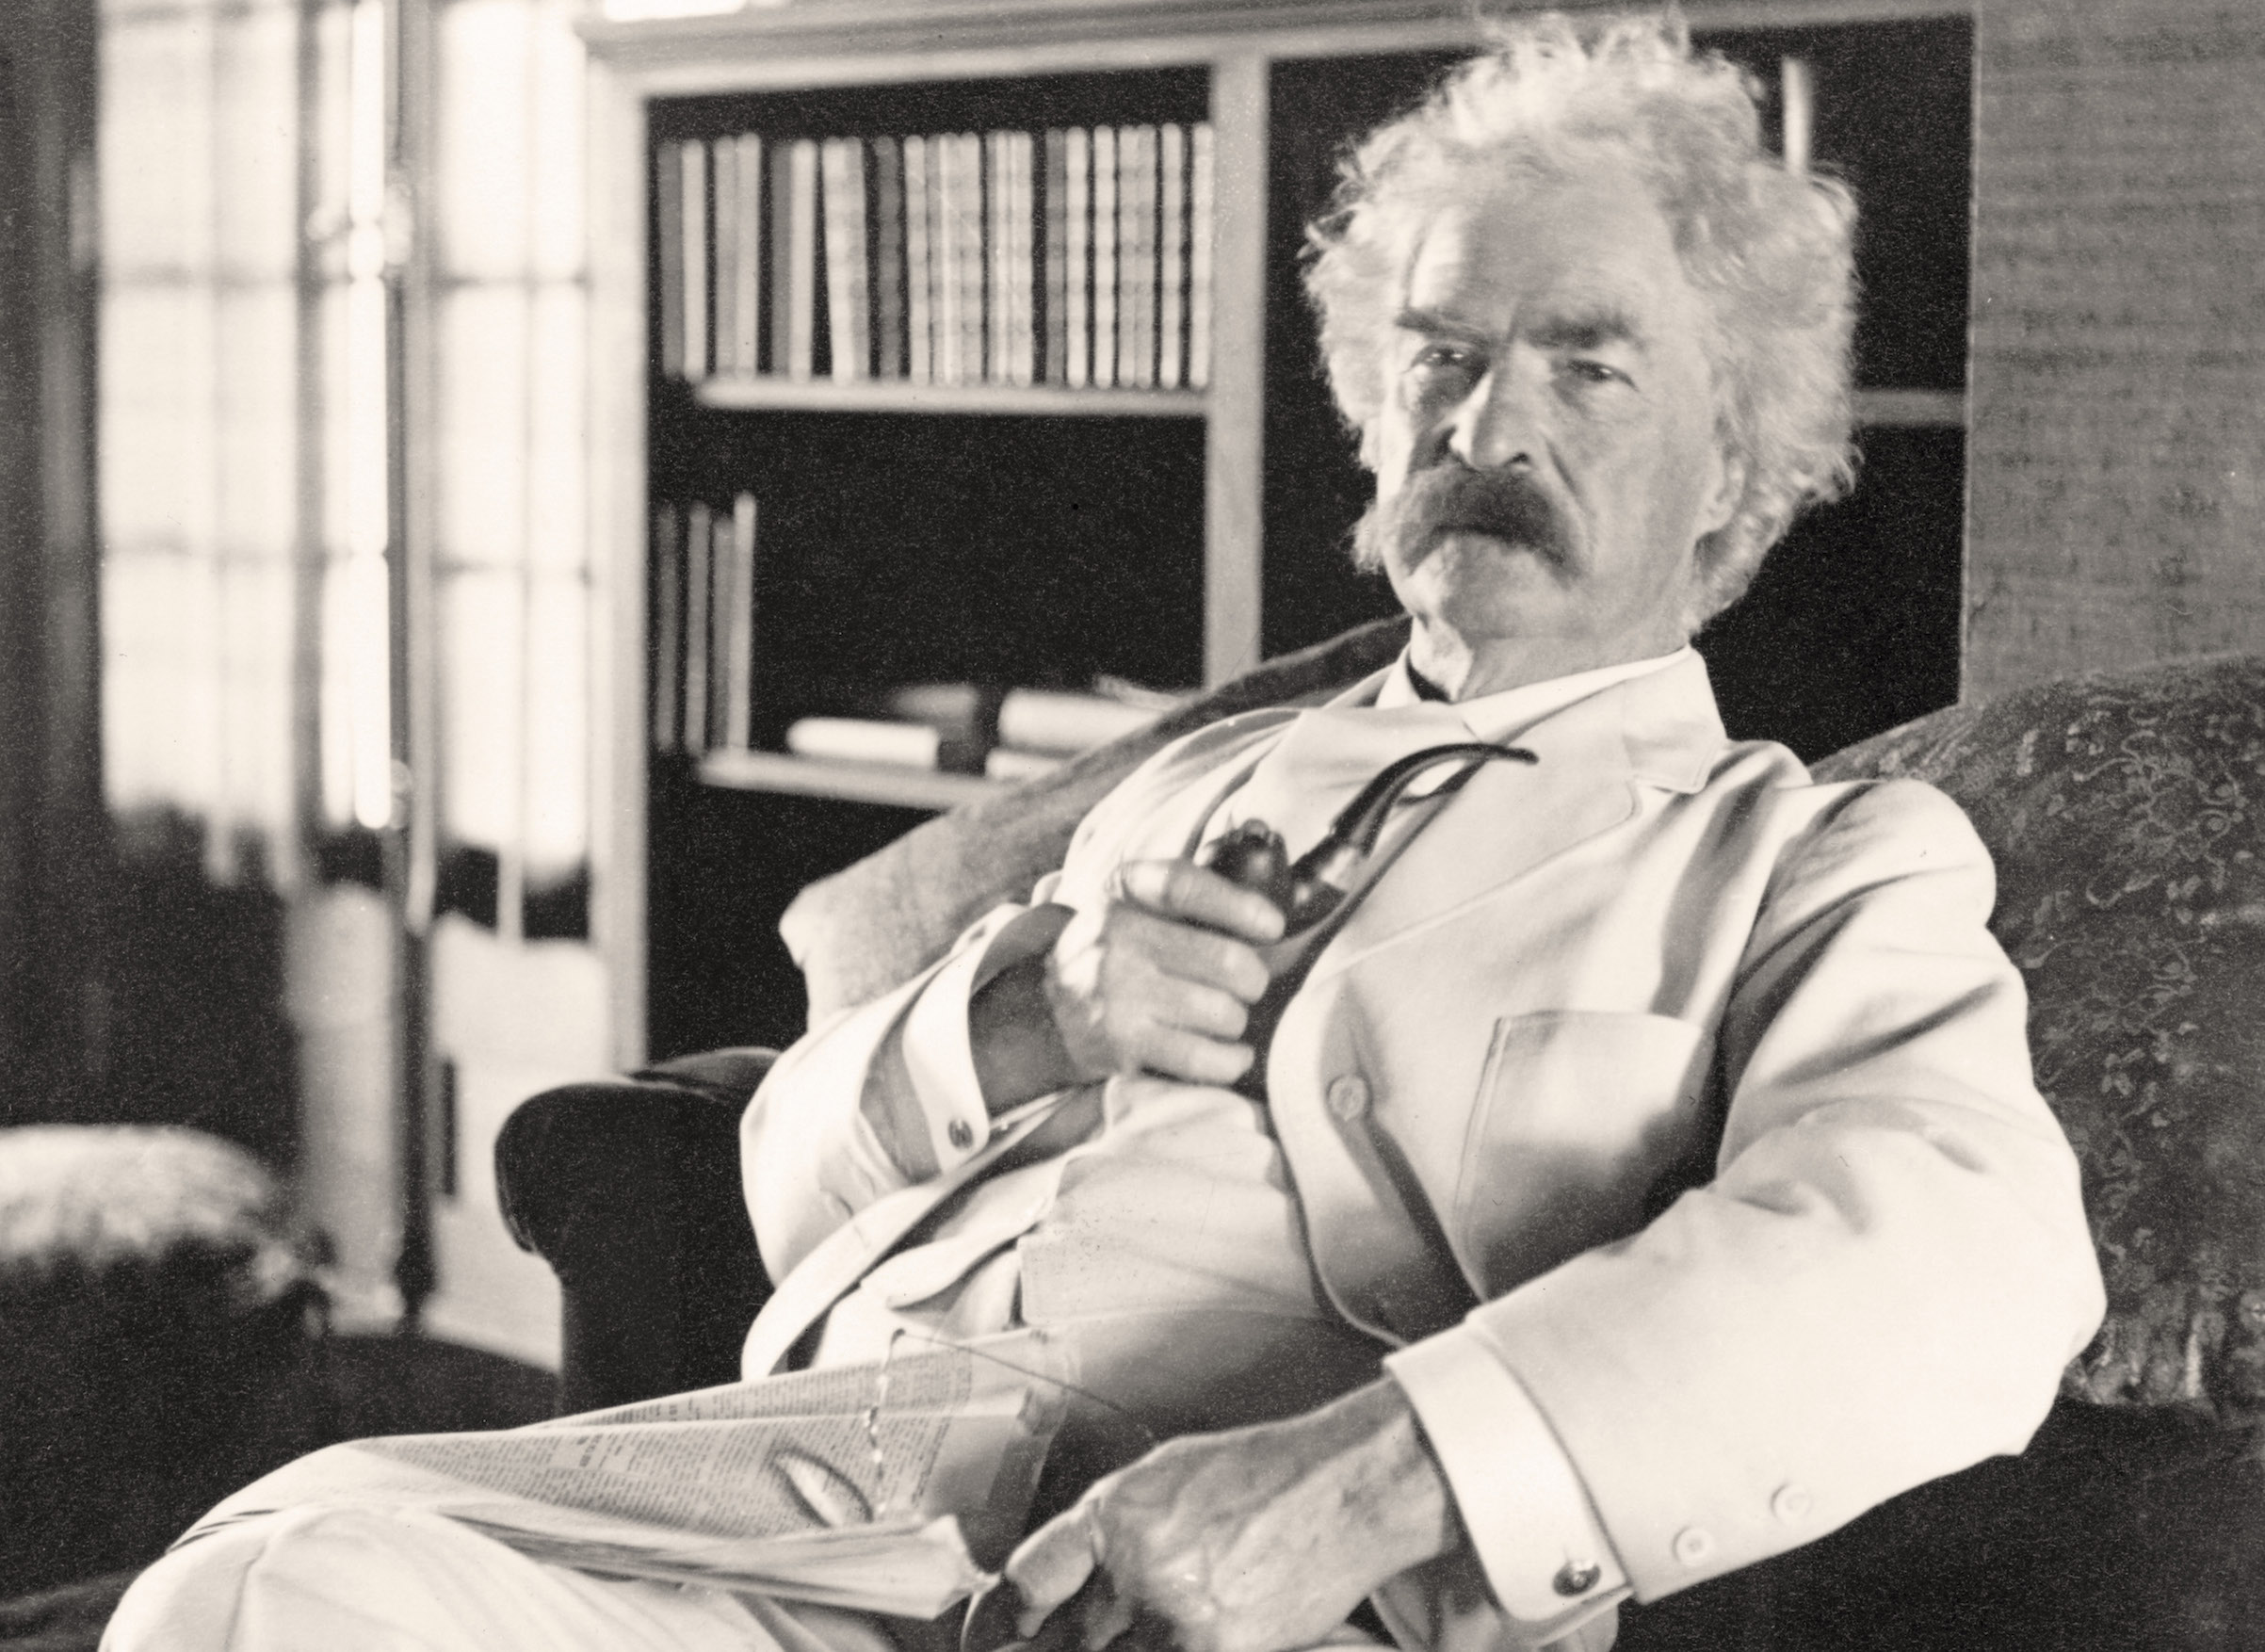 Samuel Langhorne Clemens 1835 to 1910 known by pen name Mark Twain American humorist, satirist, writer, and lecturer From photograph taken in his old age